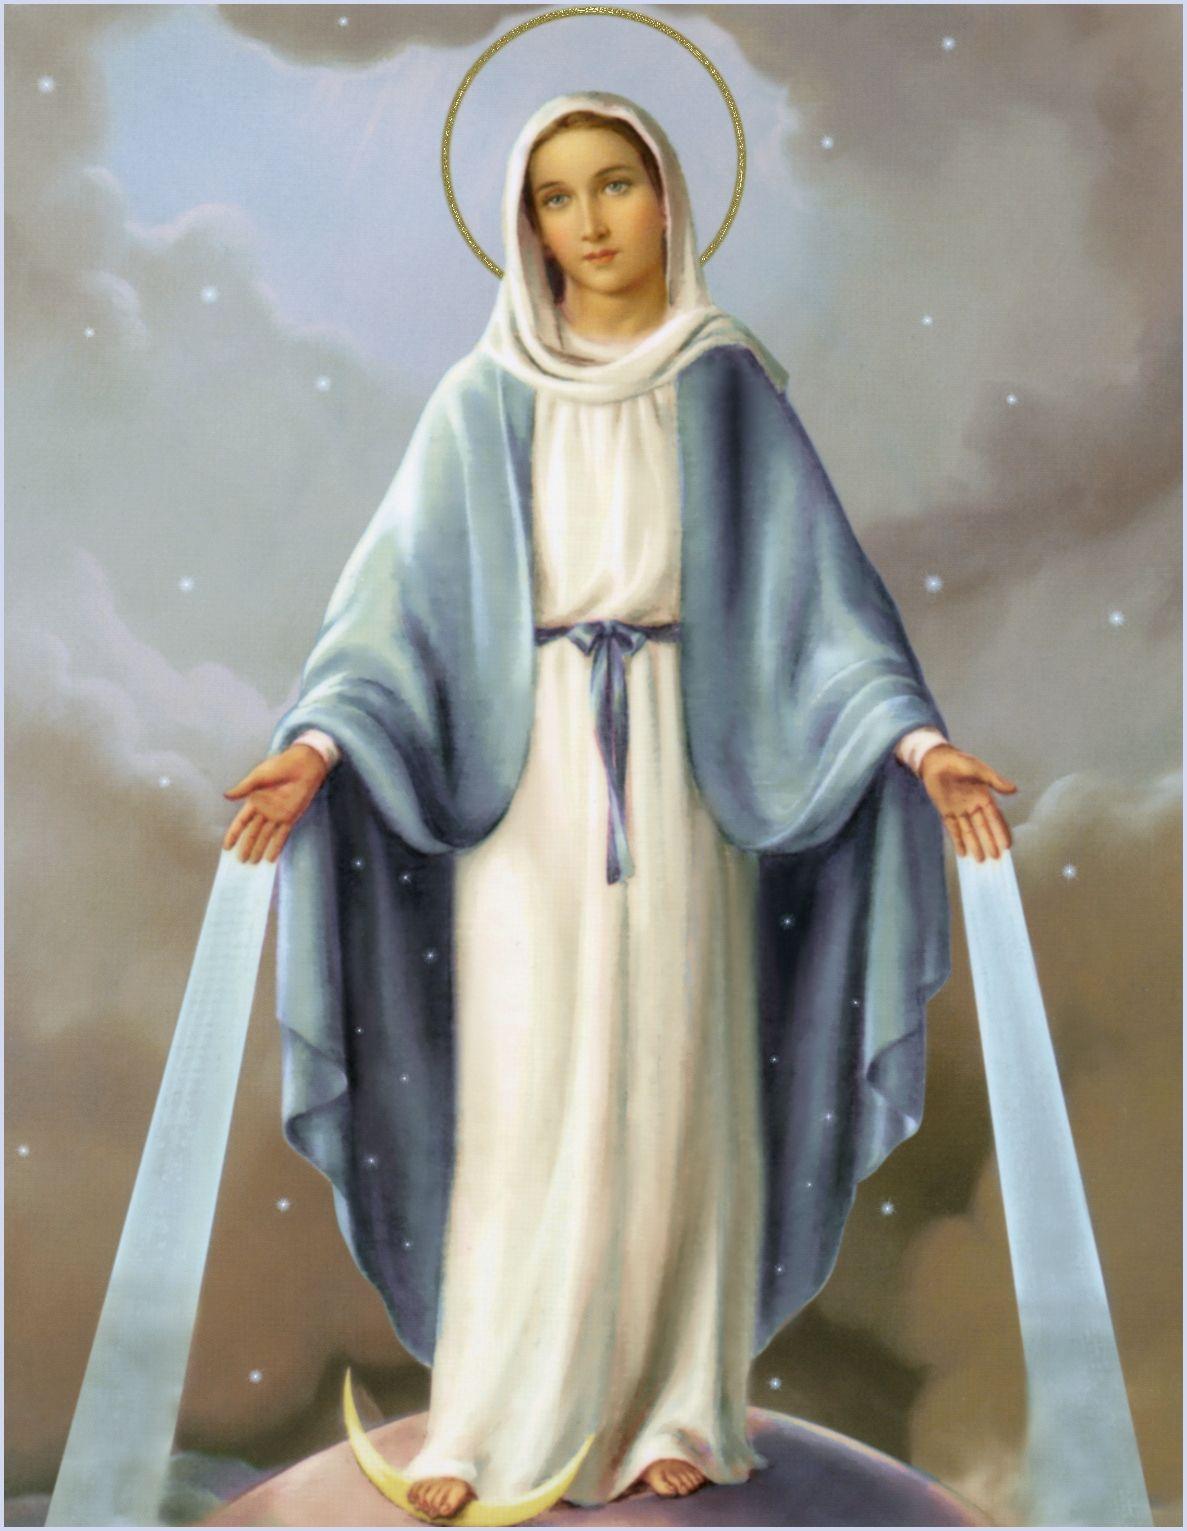 Our Blessed Mother, Virgin Mary